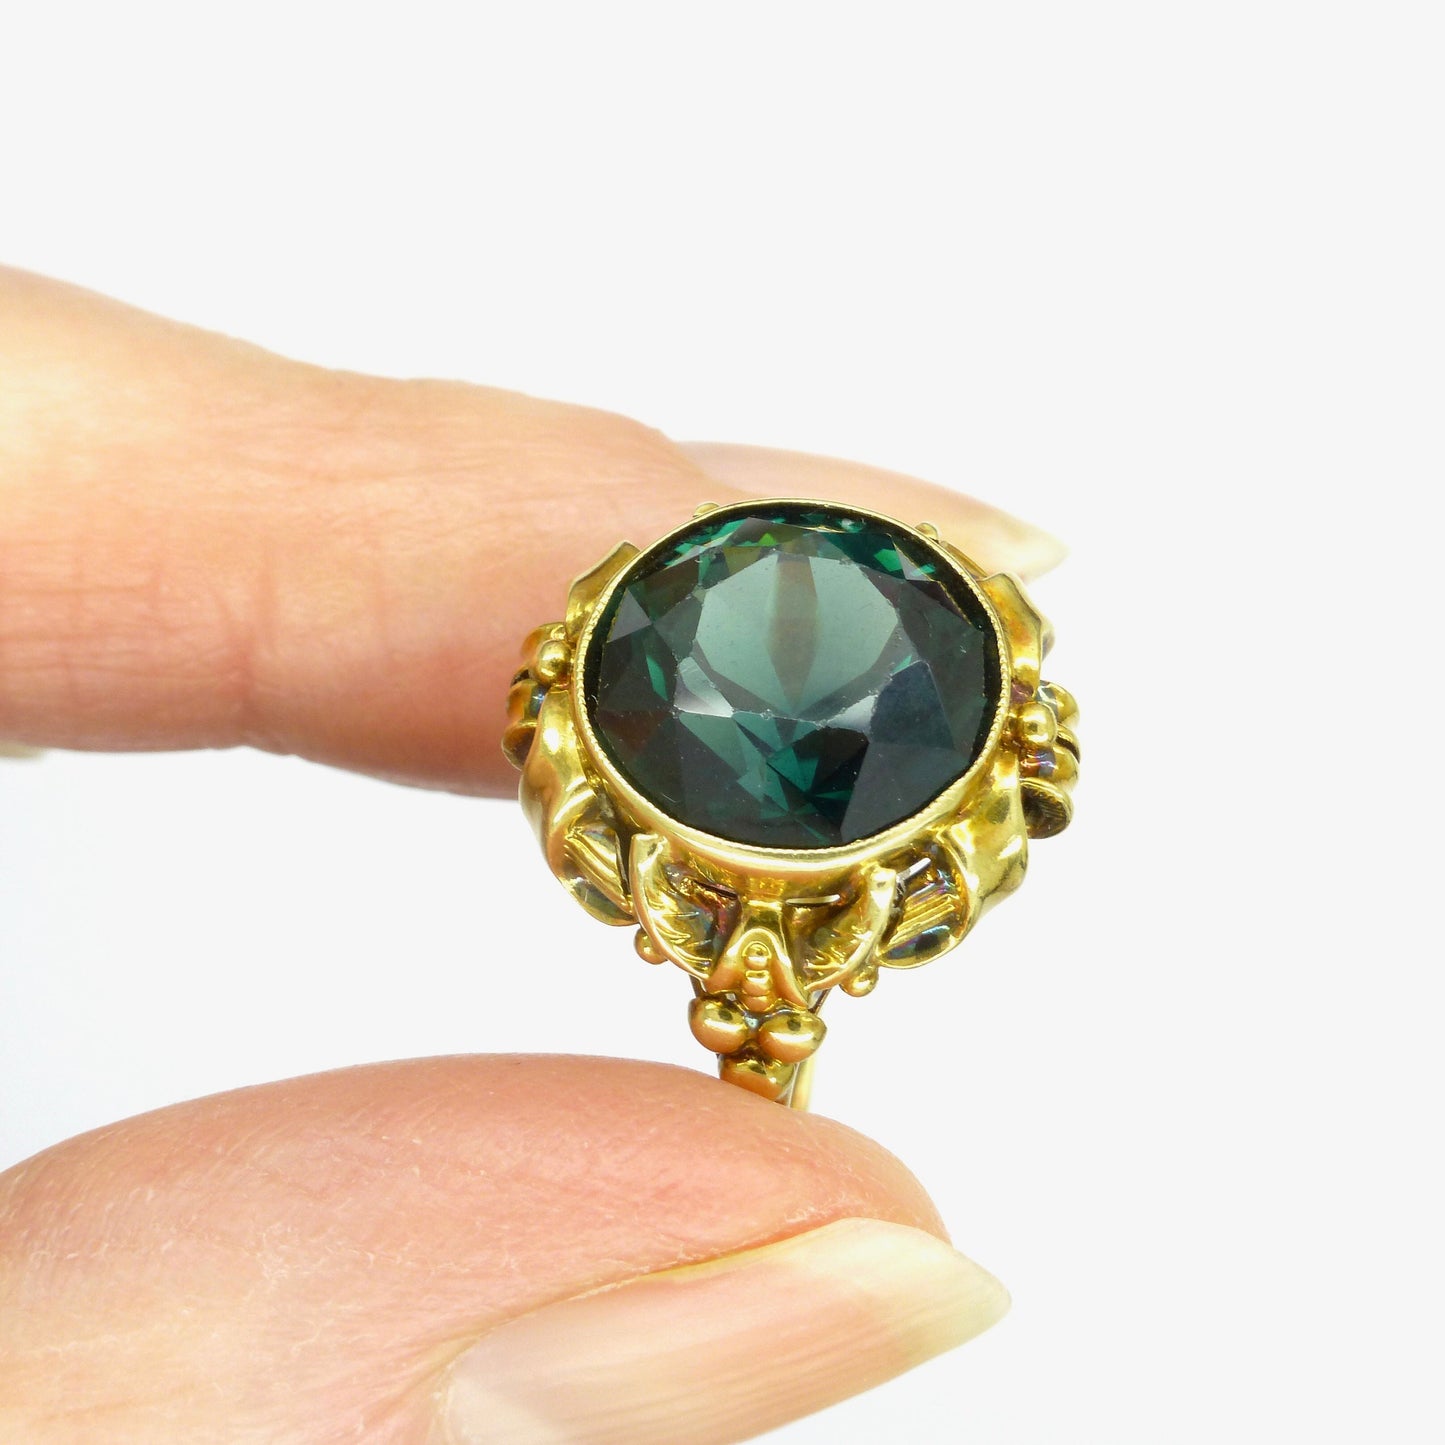 Vintage 14ct gold Synthetic green Tourmaline/Spinel dress ring c1960's